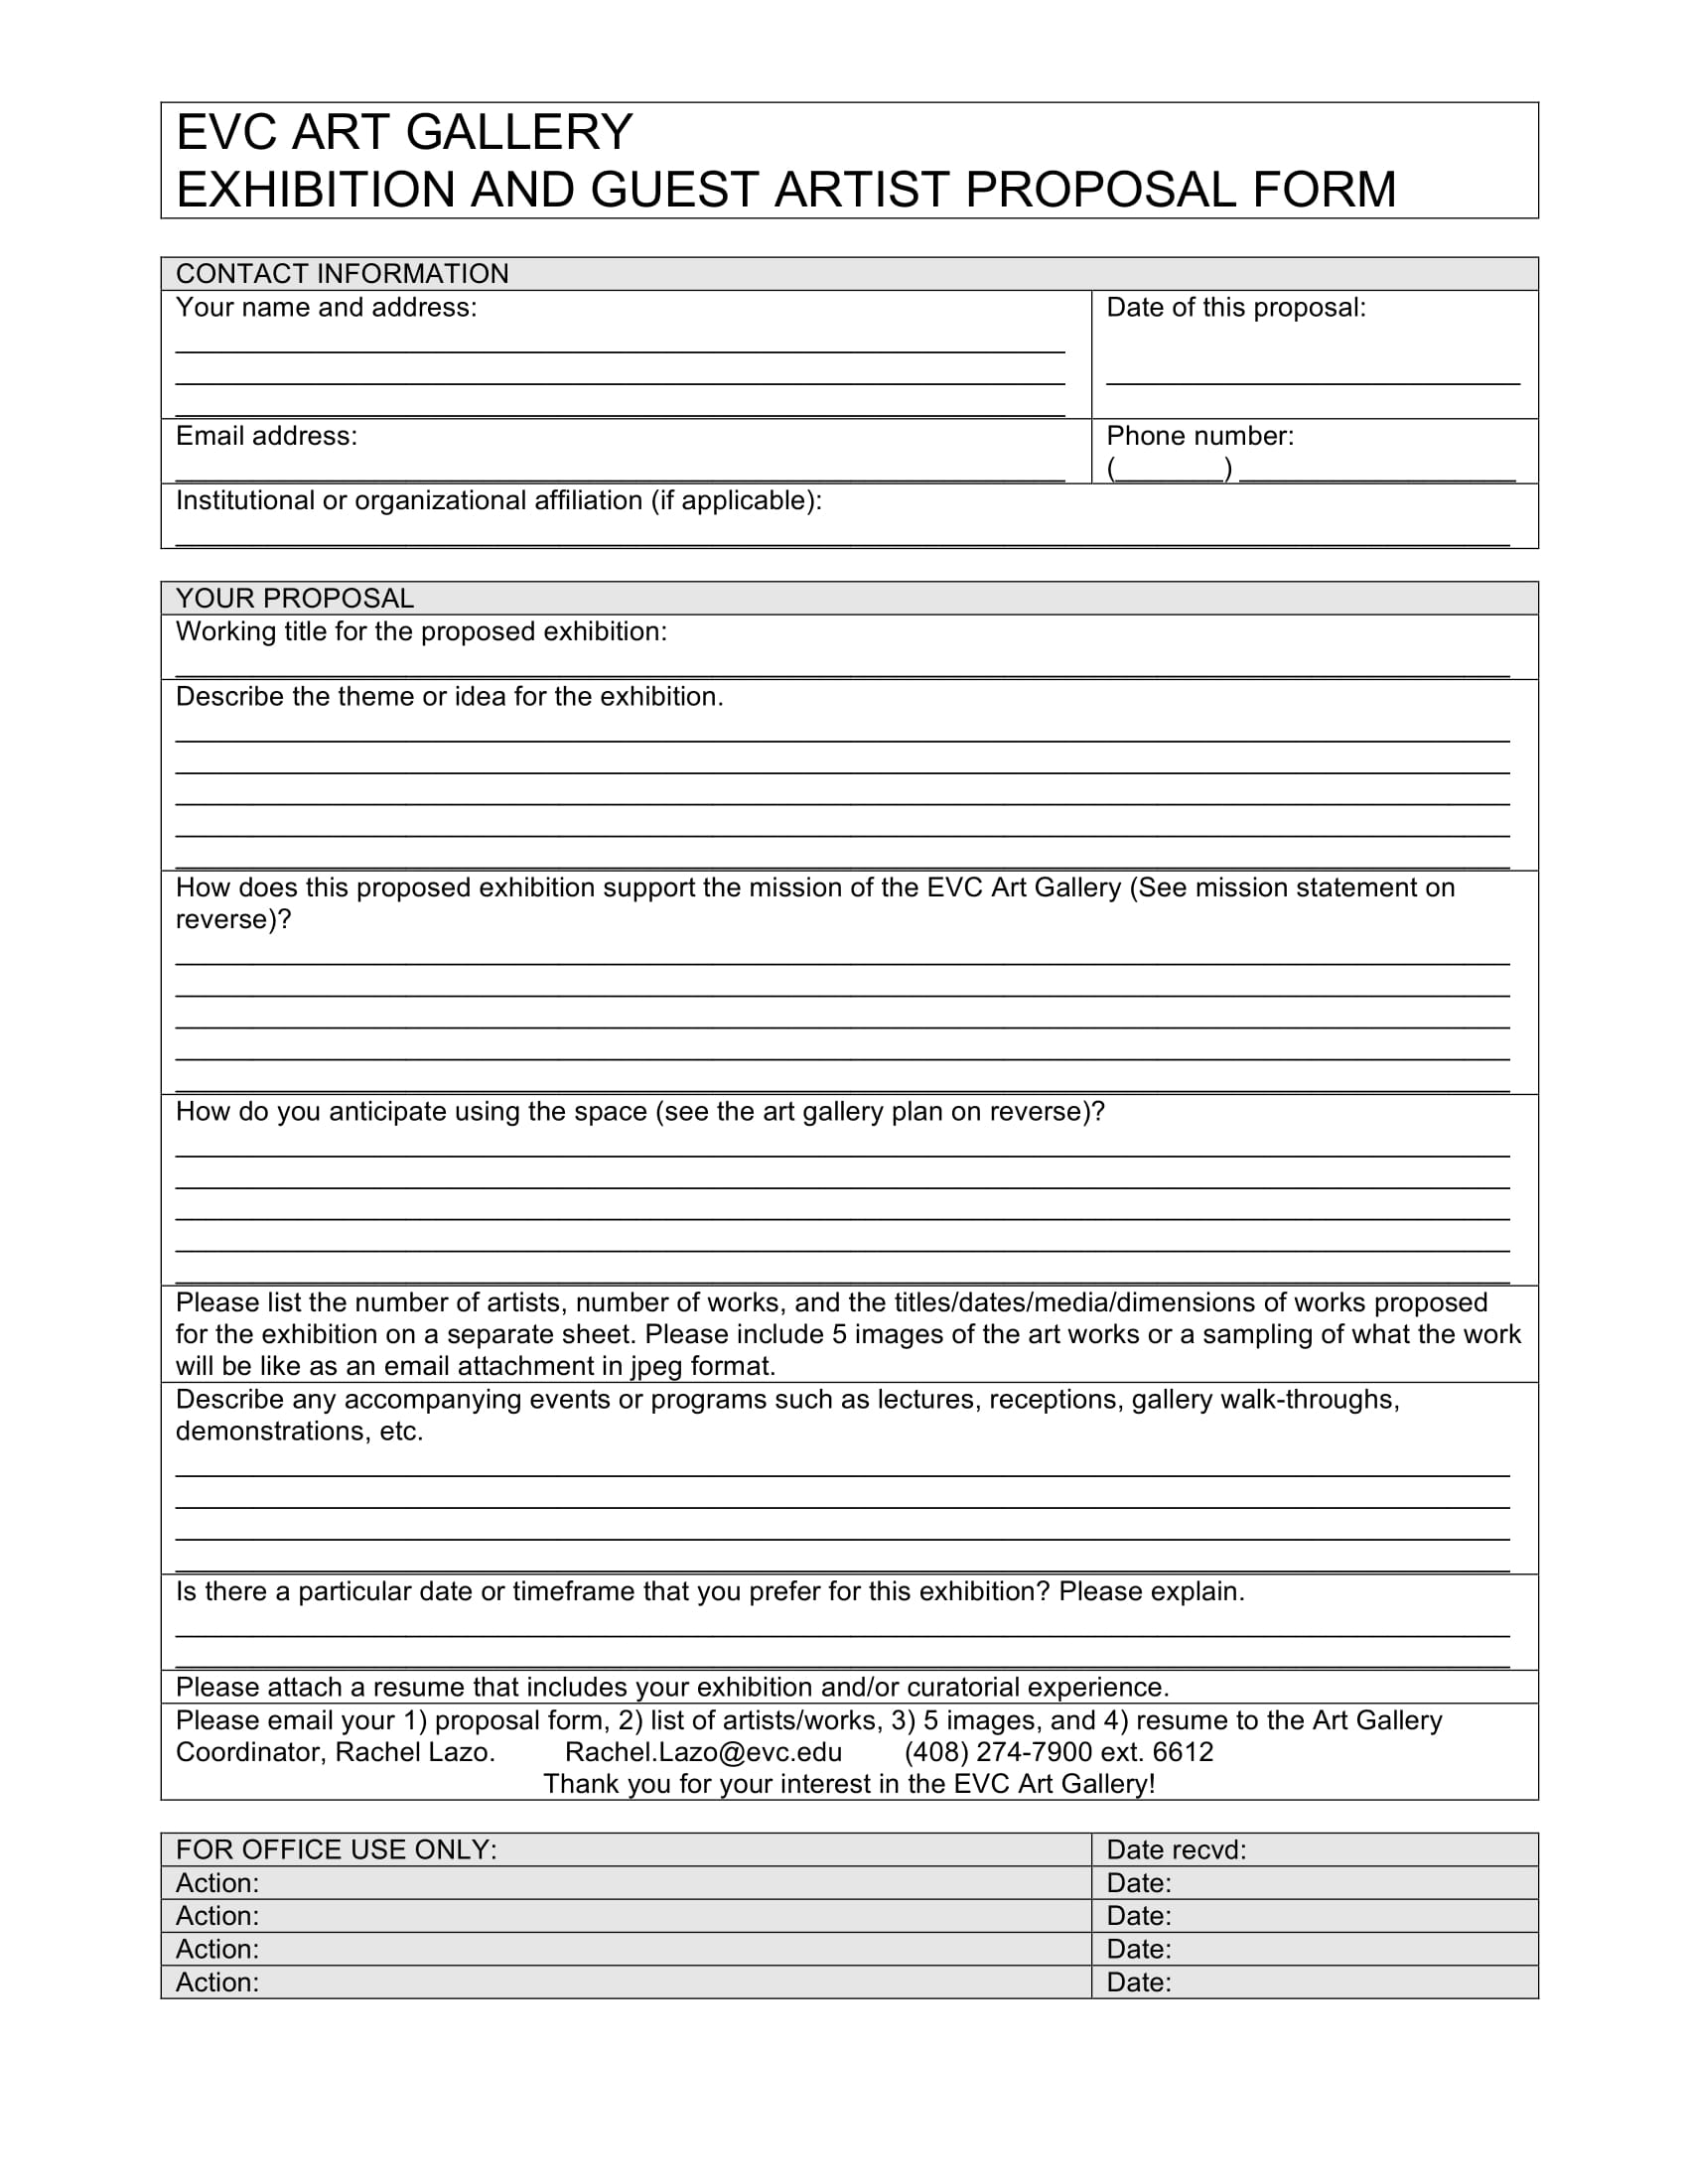 evc art gallery exhibition proposal form